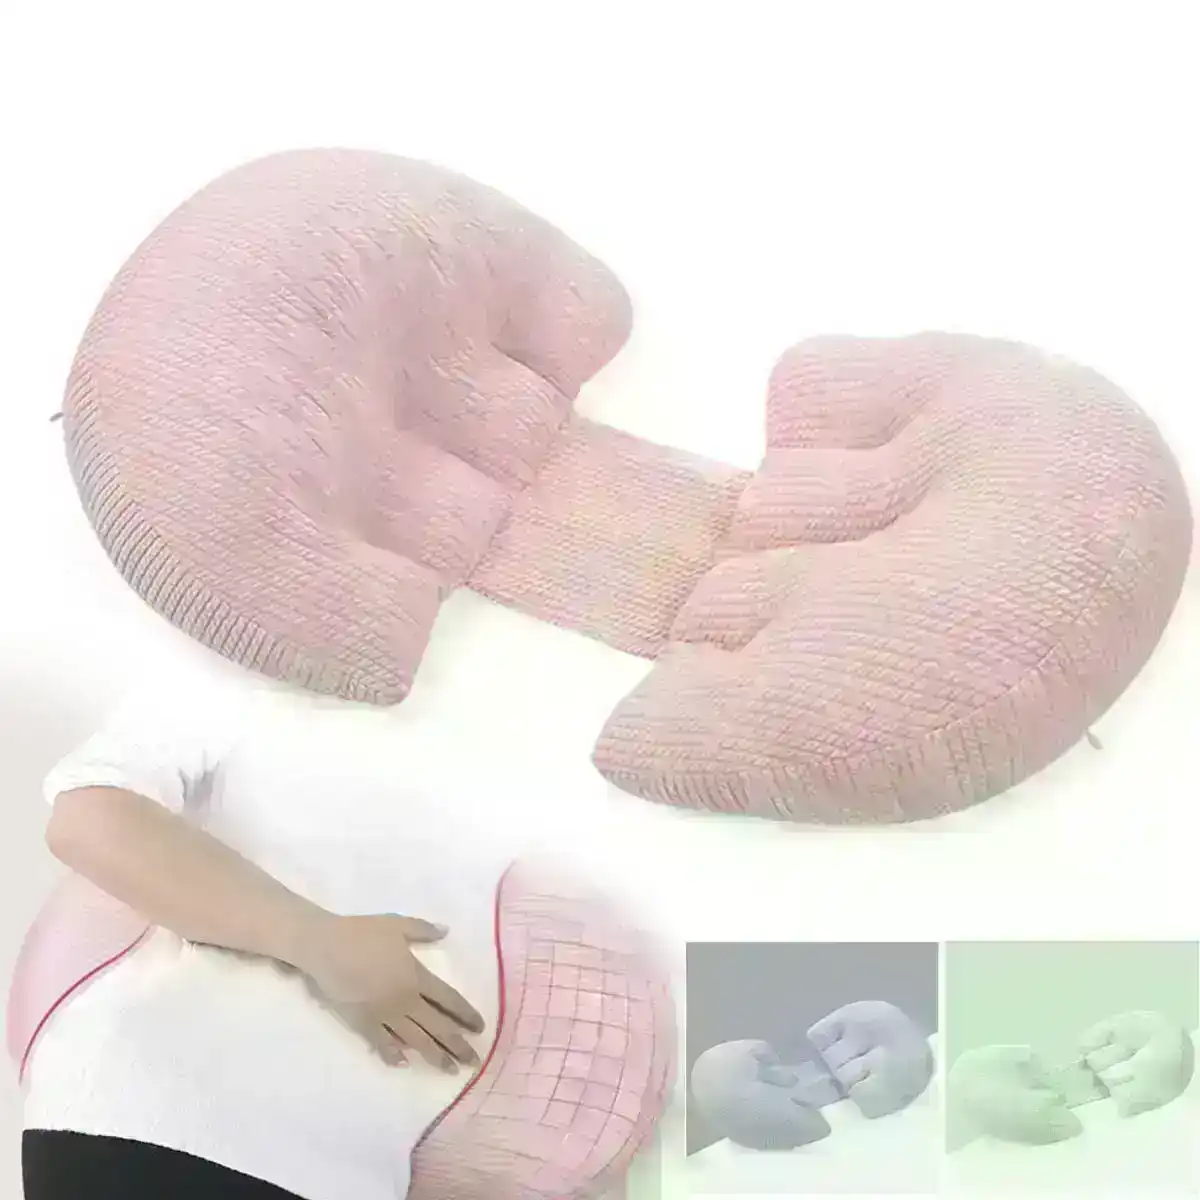 Toddly SnuggleMate - Pregnancy, Maternity & Nursing Support Pillow